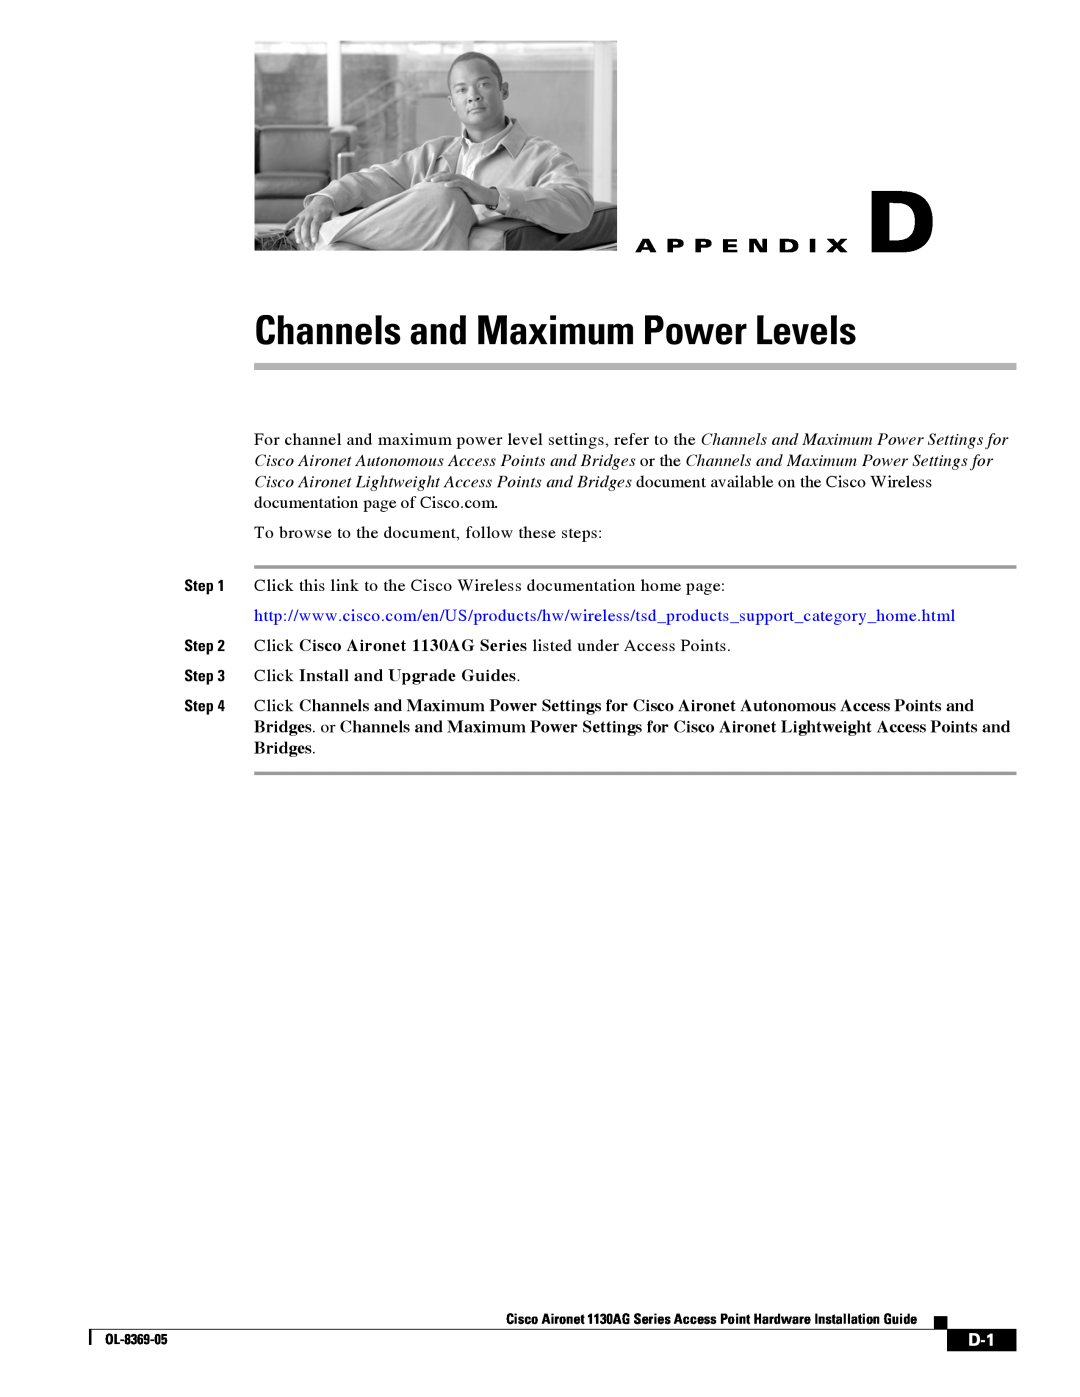 Cisco Systems 1130AG manual Channels and Maximum Power Levels, A P P E N D I X D 